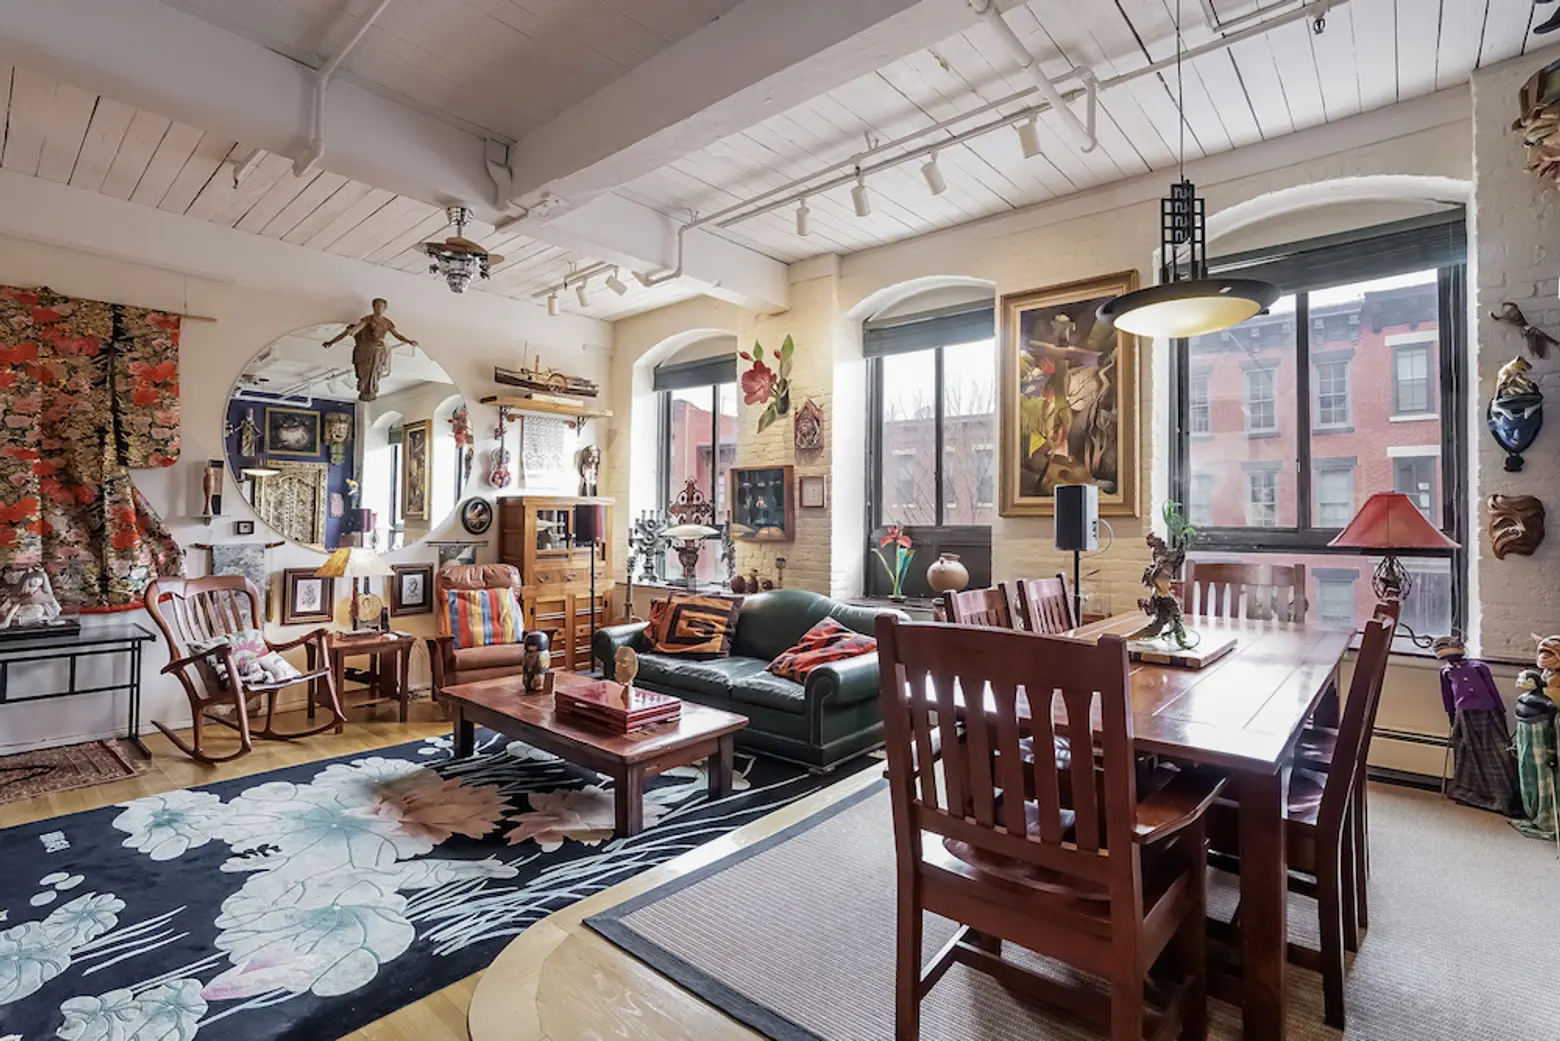 420 12th Street, Ansonia Court, Factory conversion, Loft, co-op, Brooklyn loft for sale, cool listing, Ansonia Clockworks Company, park slope